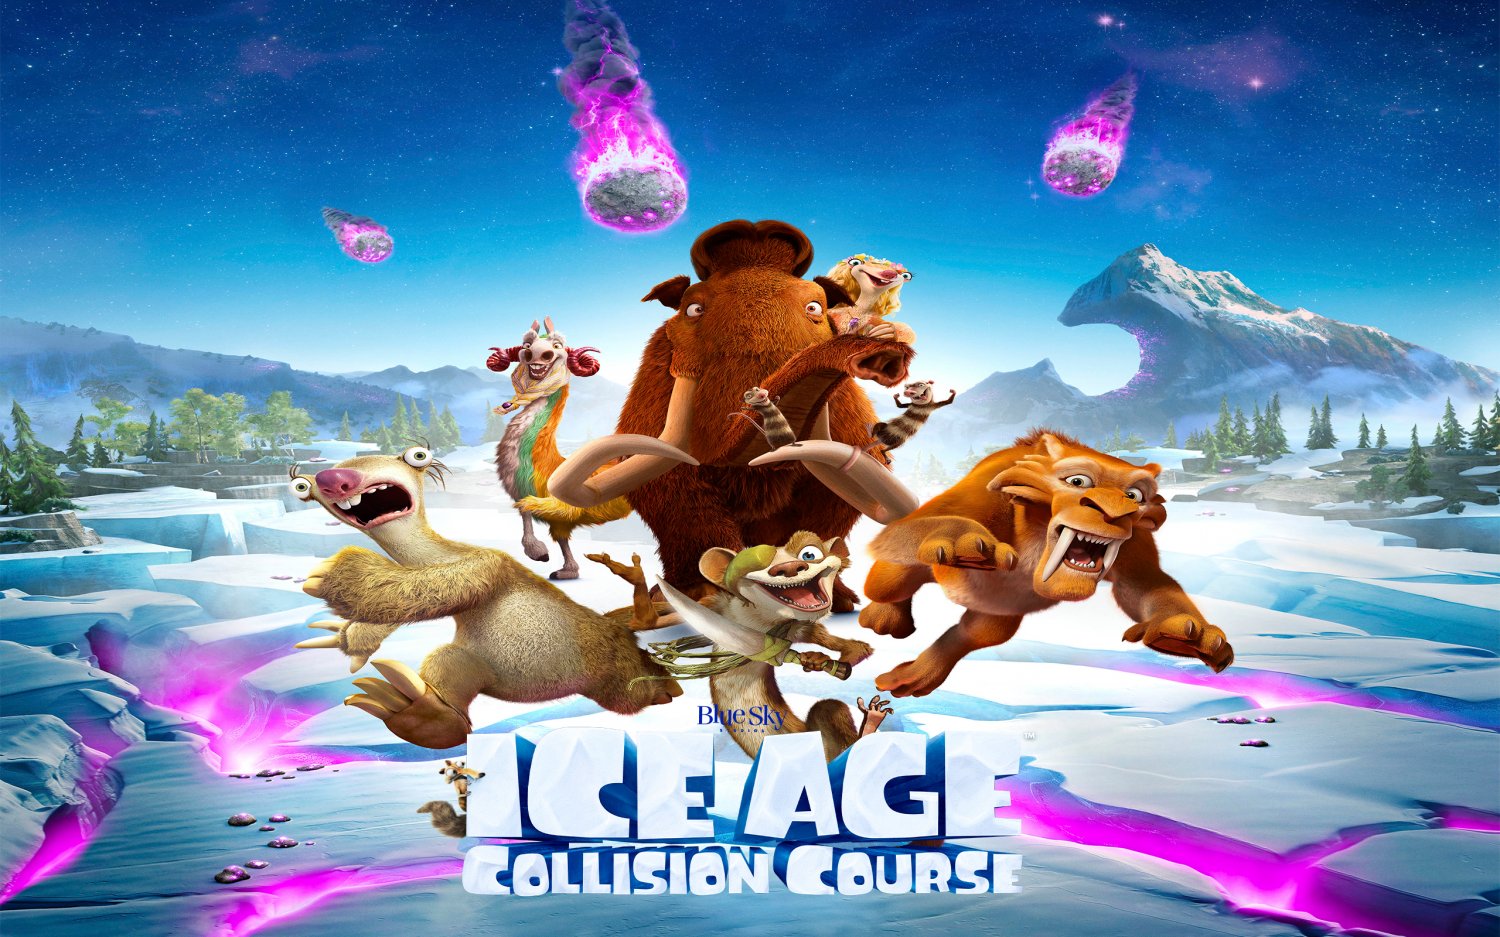 Ice Age 5 Collision Course 13"x19" (32cm/49cm) Polyester Fabric Poster